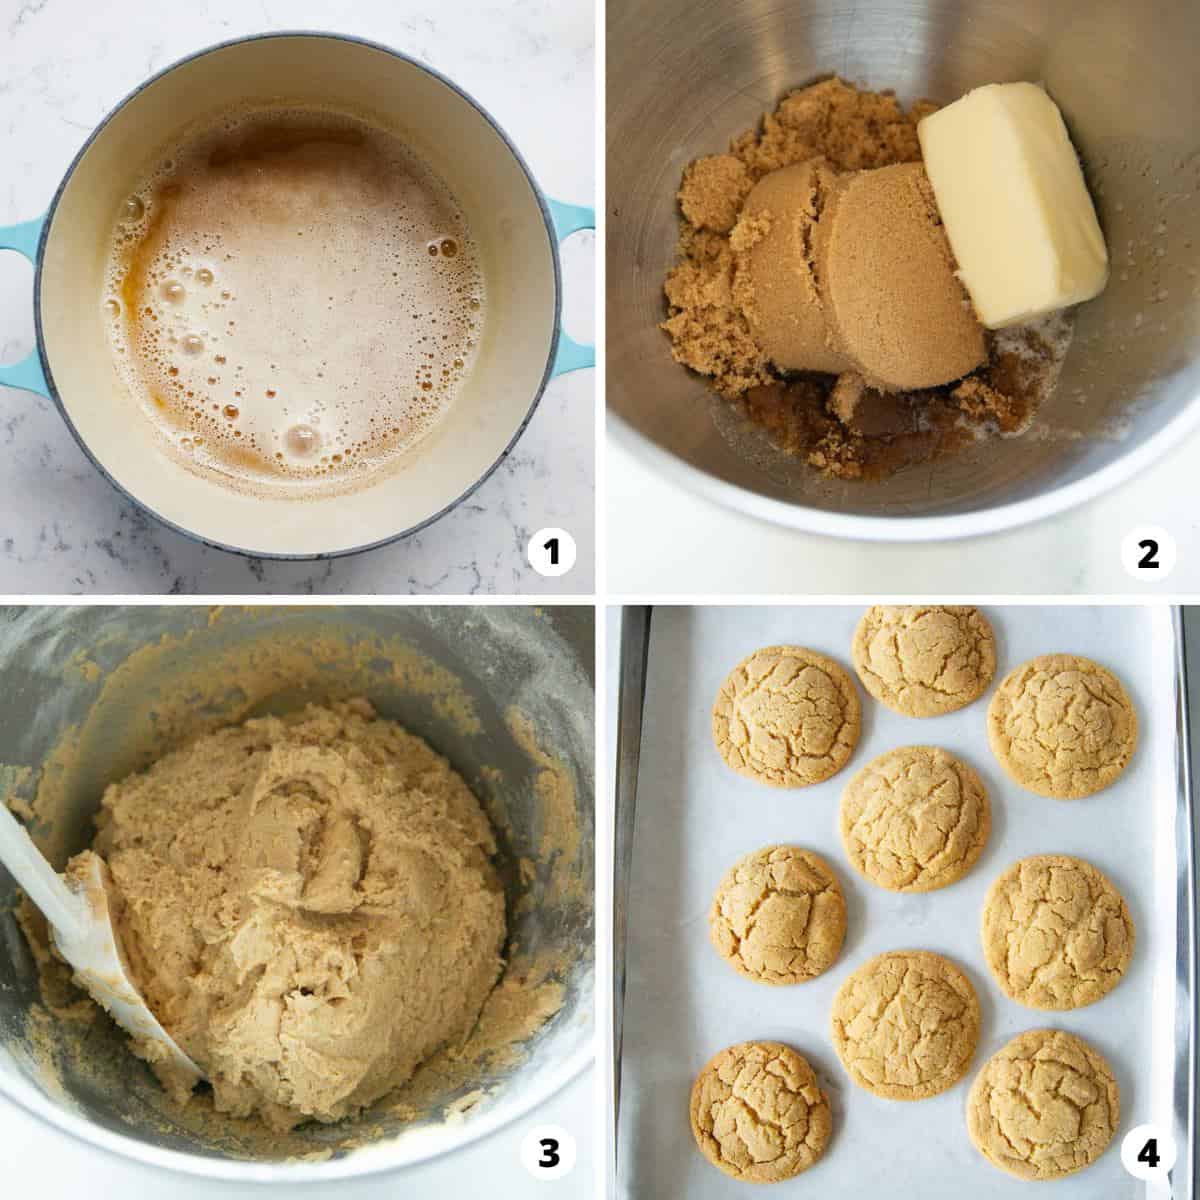 Showing how to make brown sugar cookies.